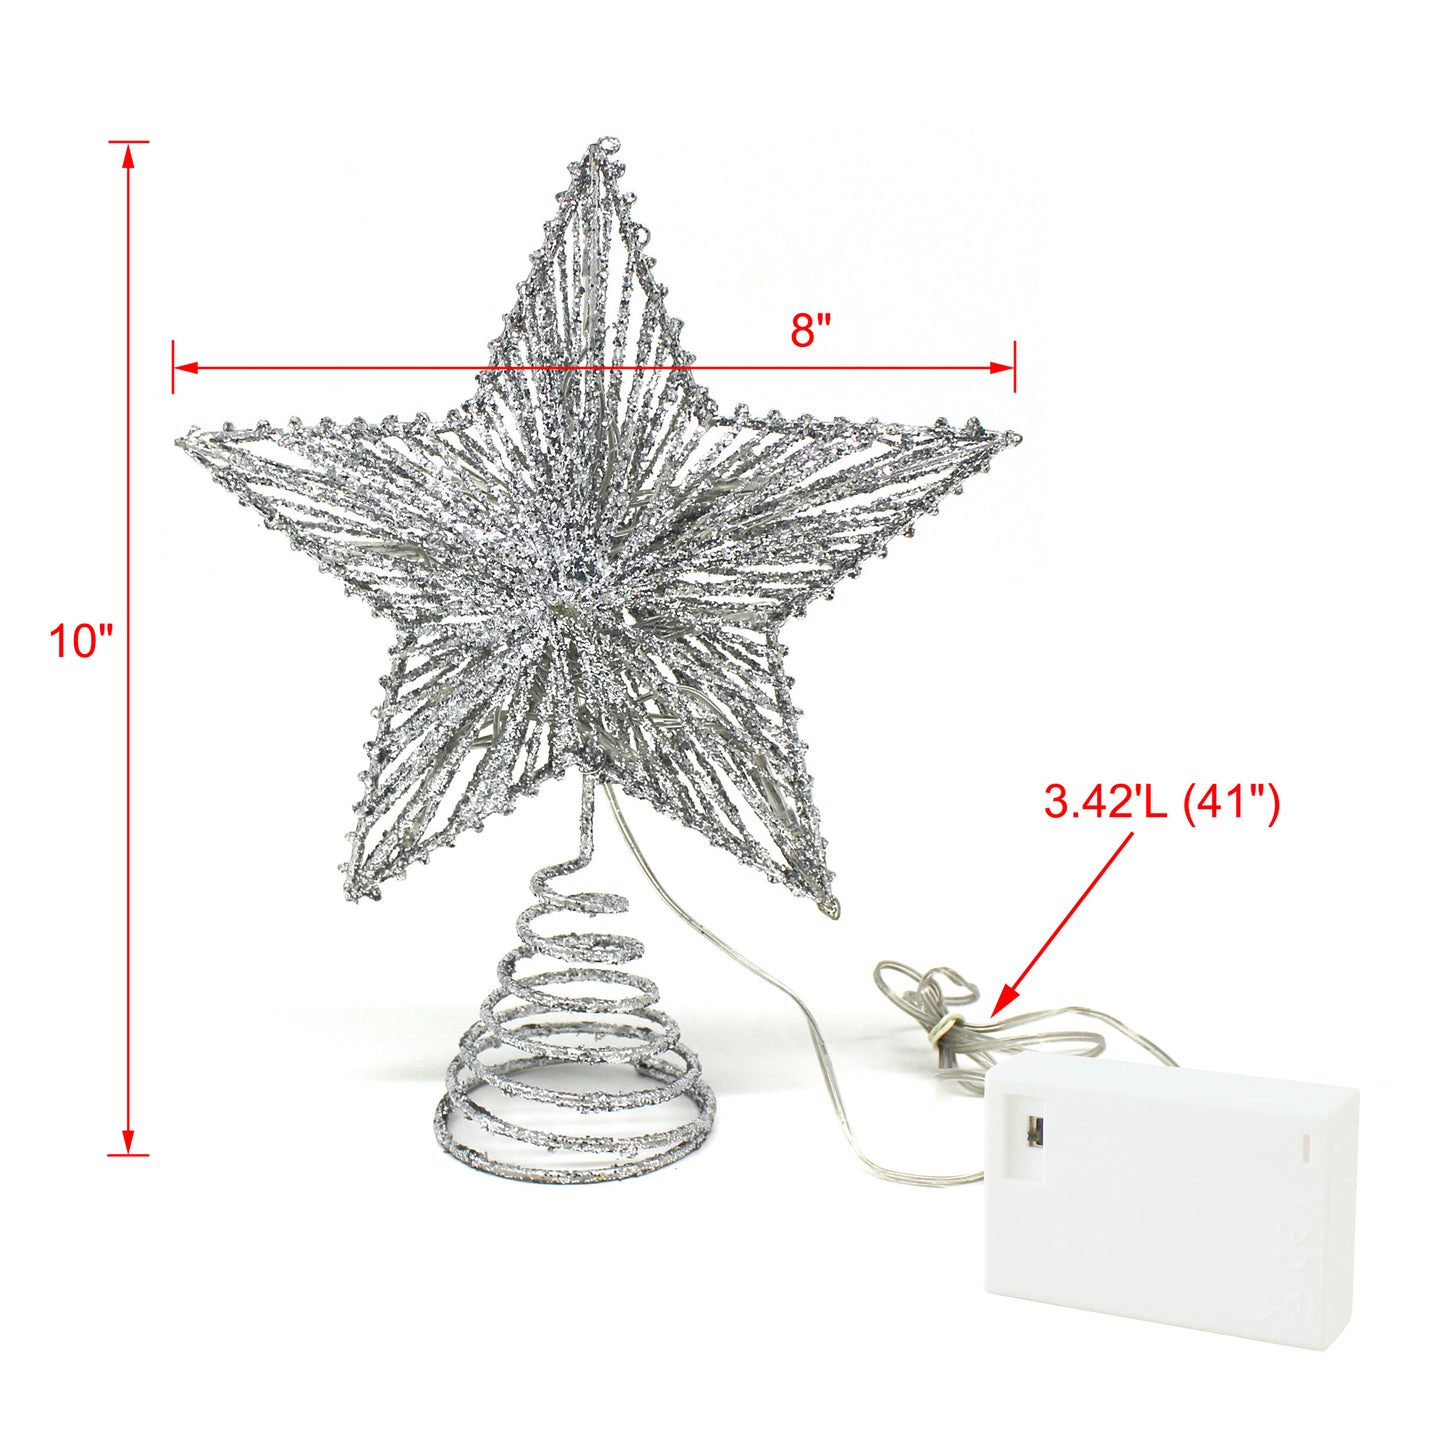 CVHOMEDECO. Silver Glittered 3D Tree Top Star with Warm White LED Lights and timer for Christmas Tree Decoration and Holiday Seasonal Décor, 8 x 10 Inch